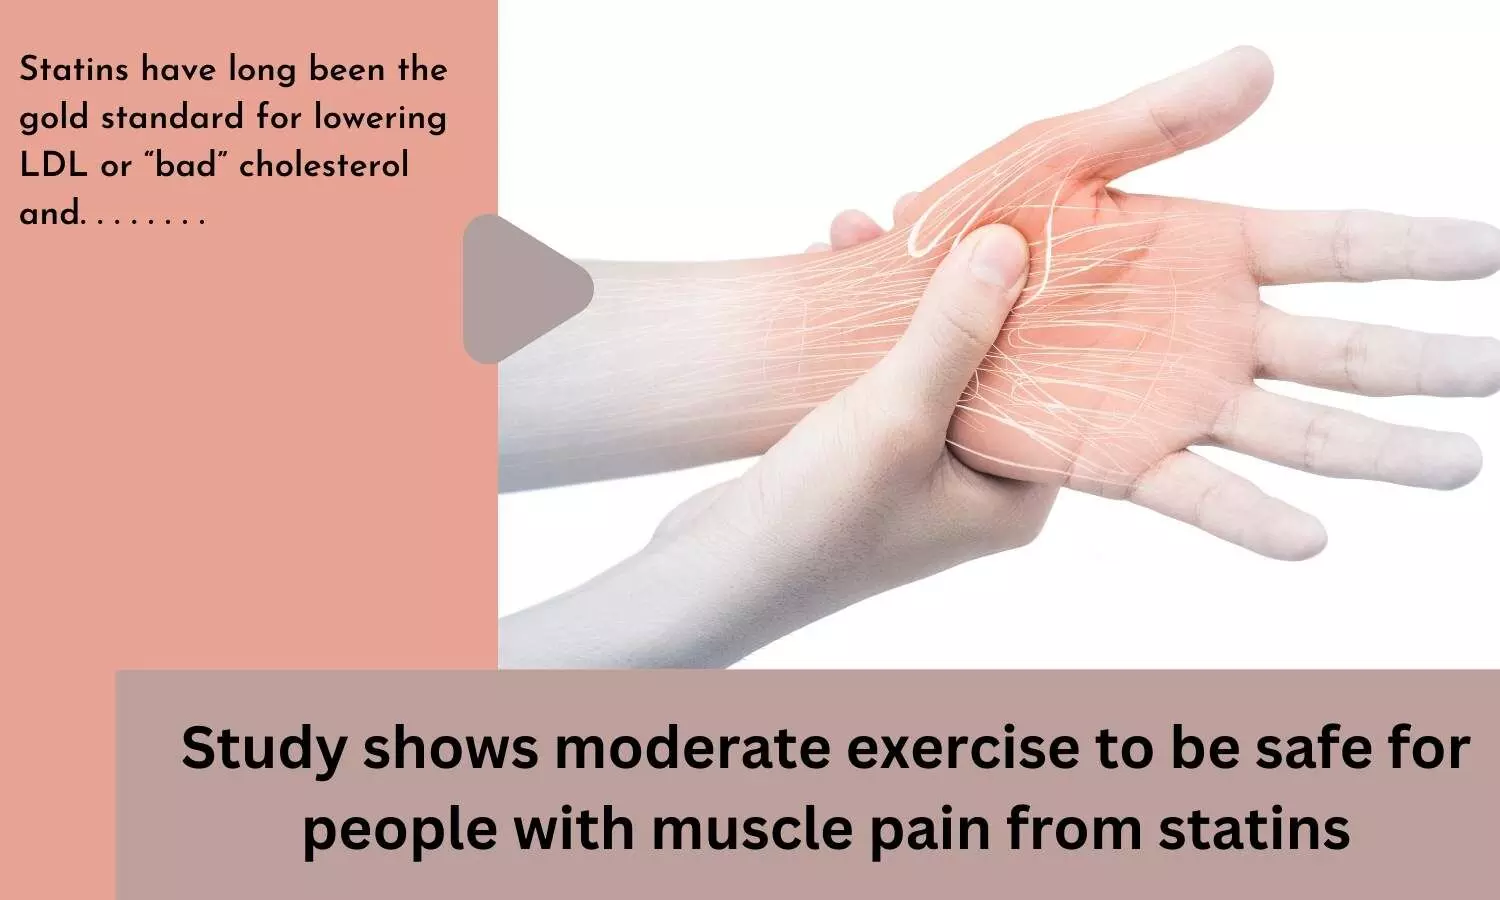 Study shows moderate exercise to be safe for people with muscle pain from statins